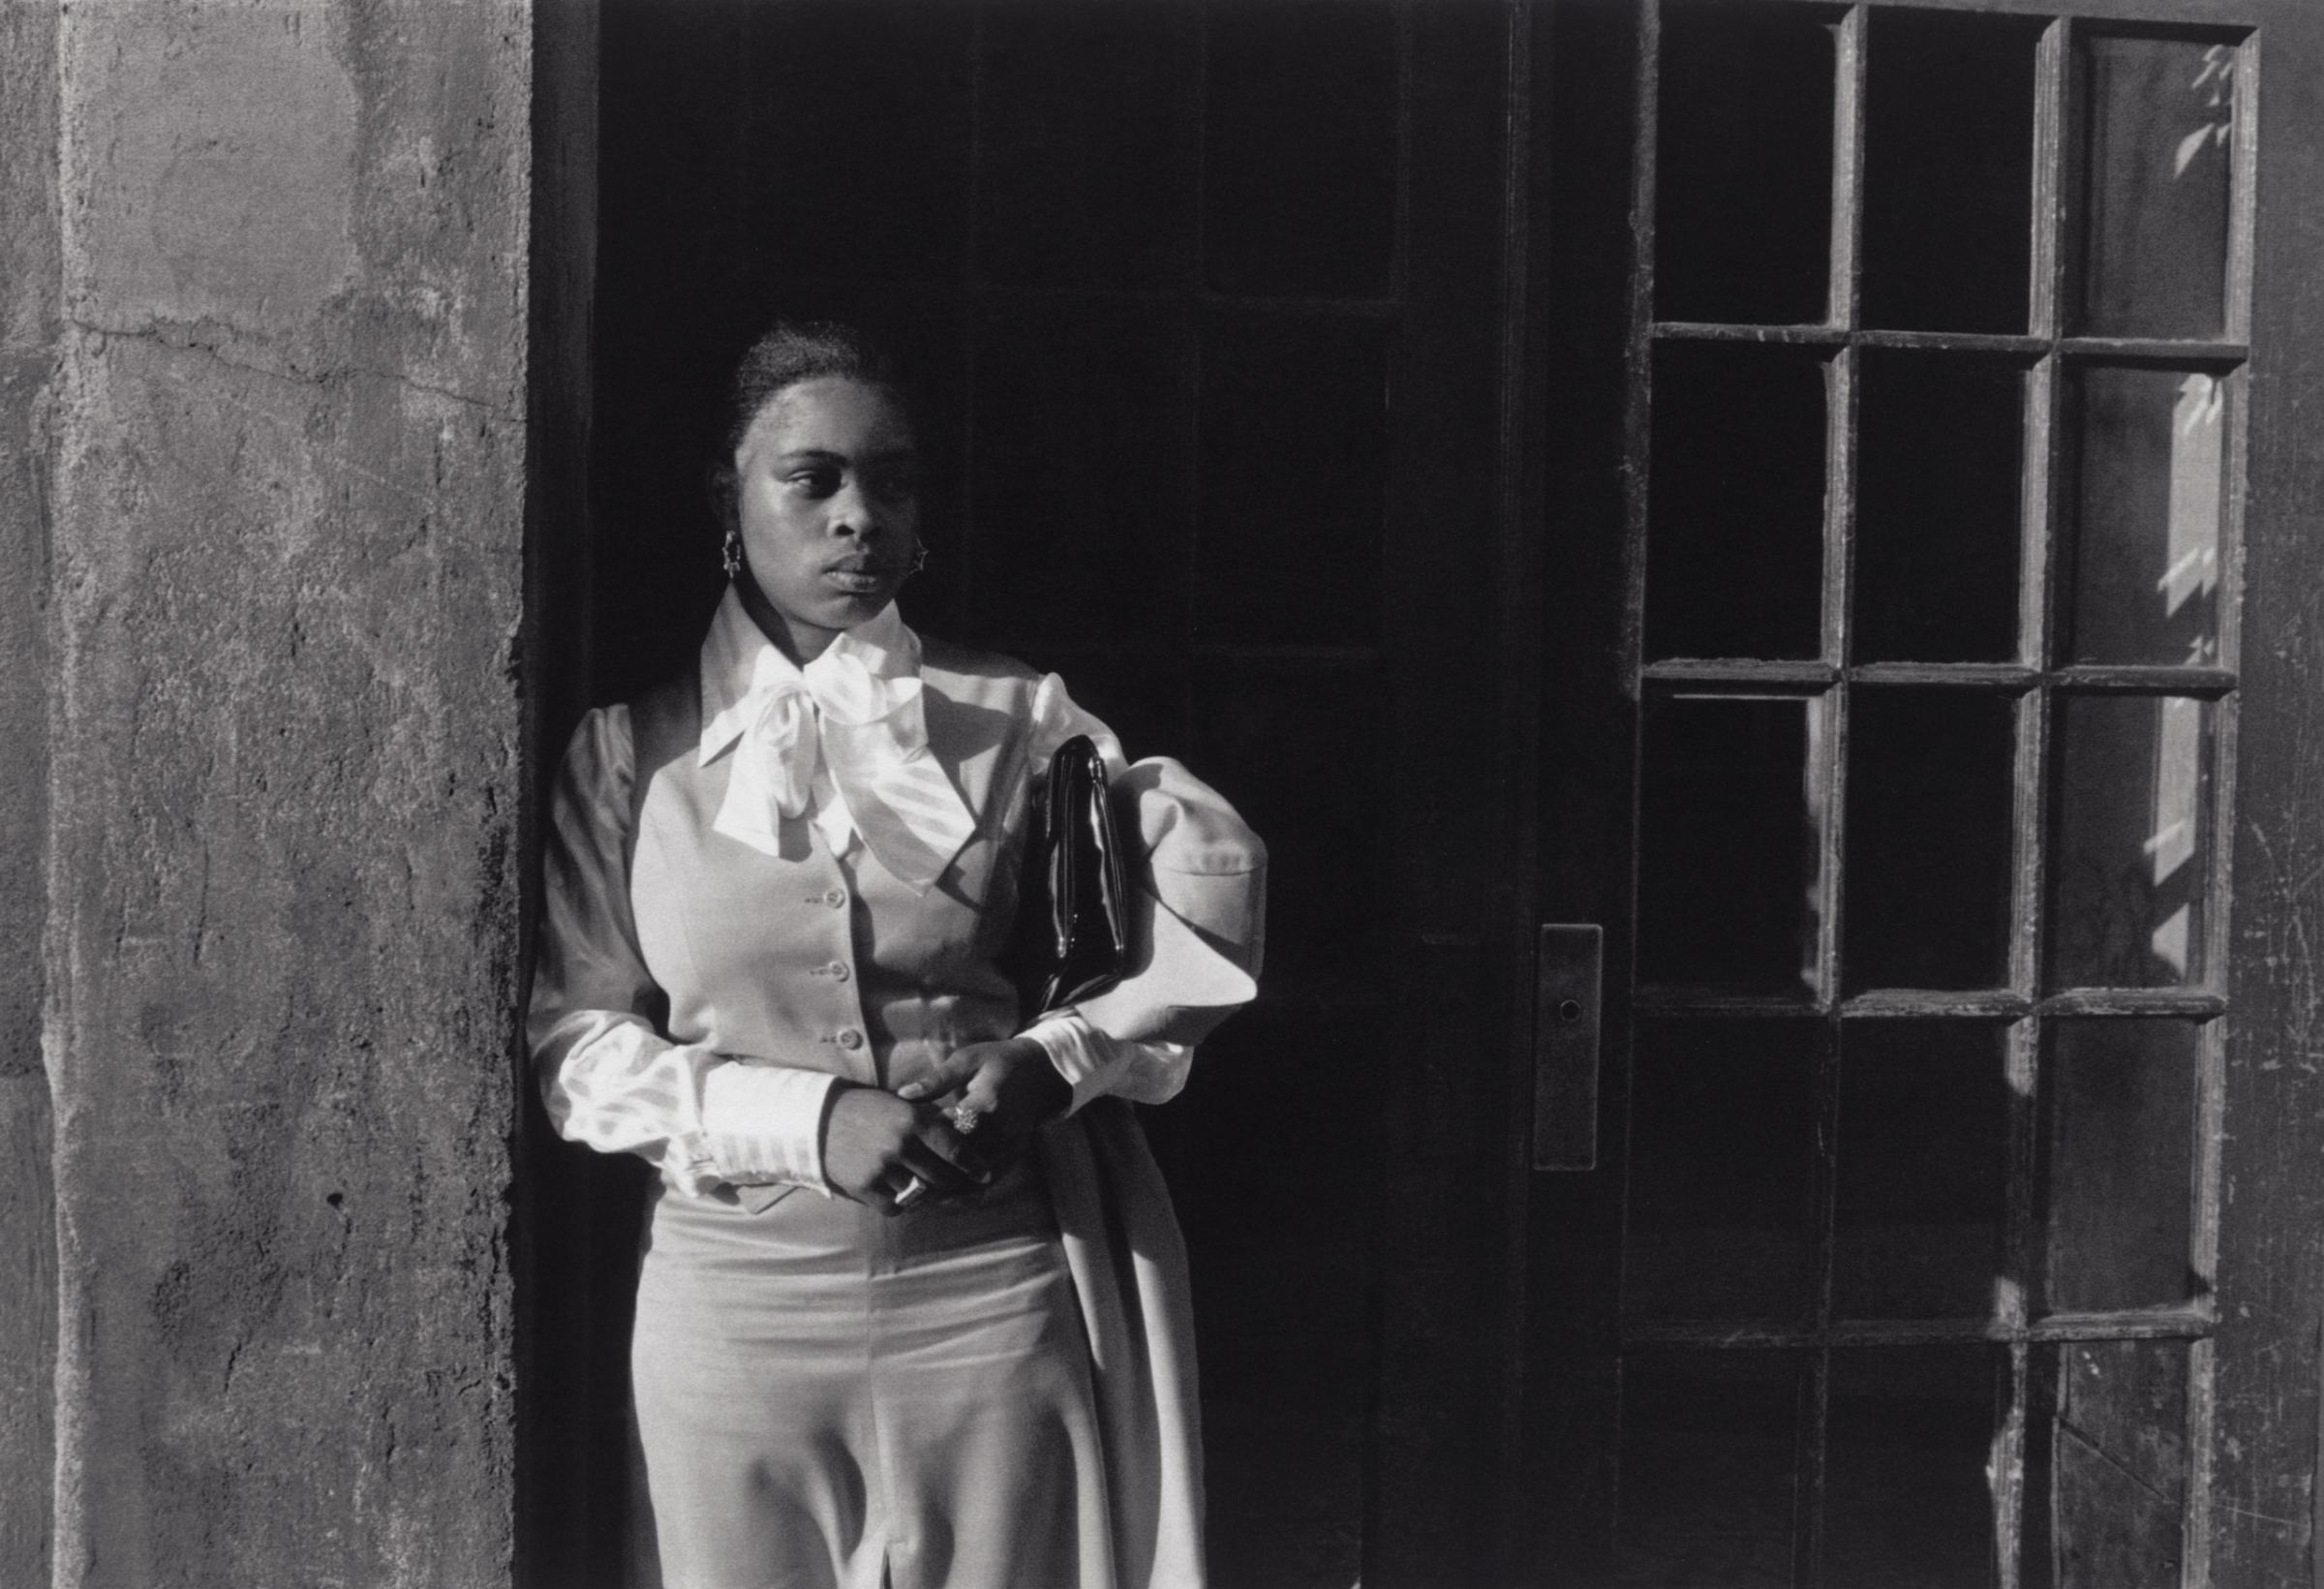 Harlem, U.S.A.: A Woman Waiting in a Doorway, 1976